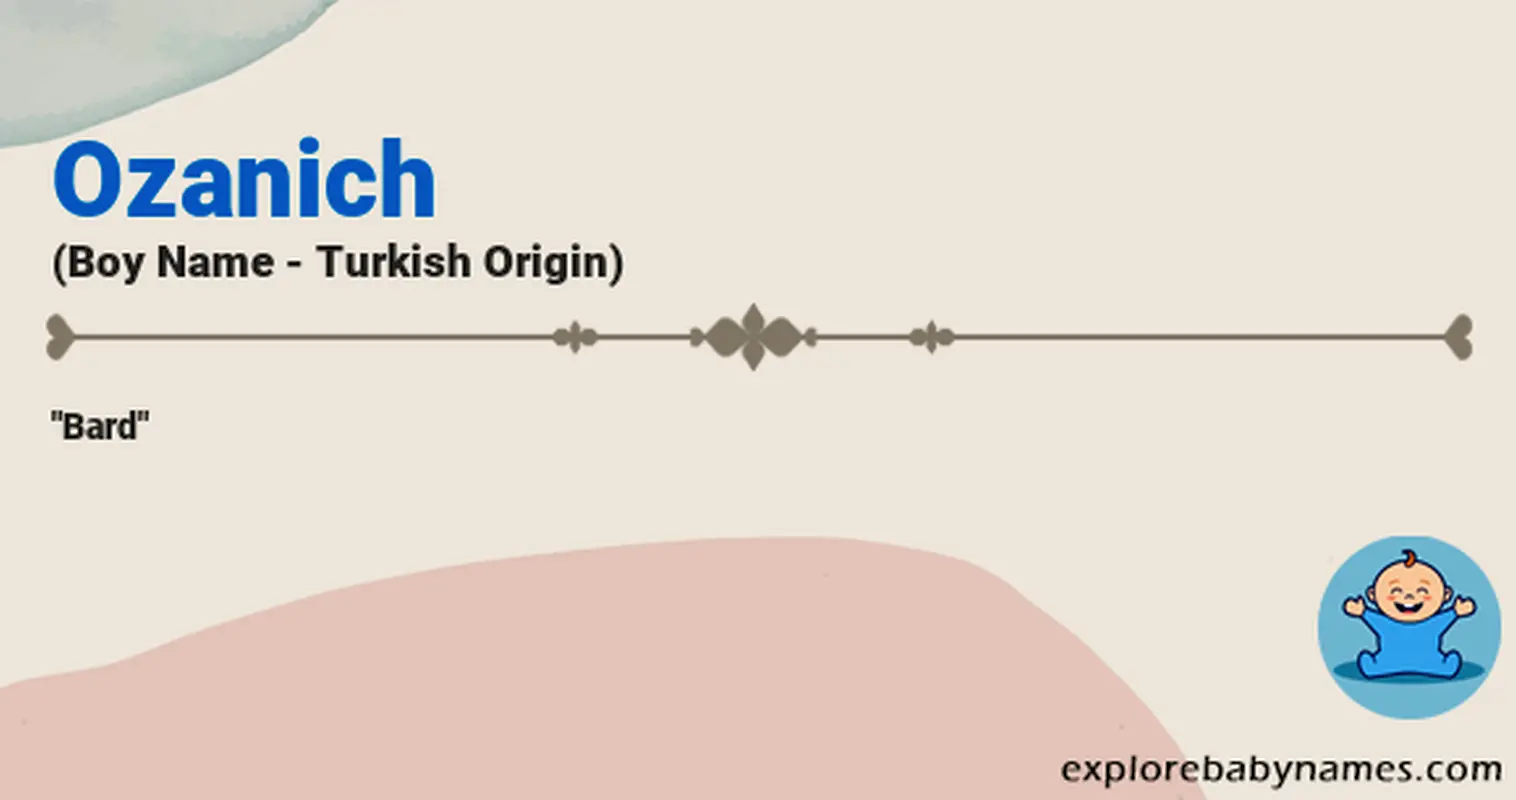 Meaning of Ozanich